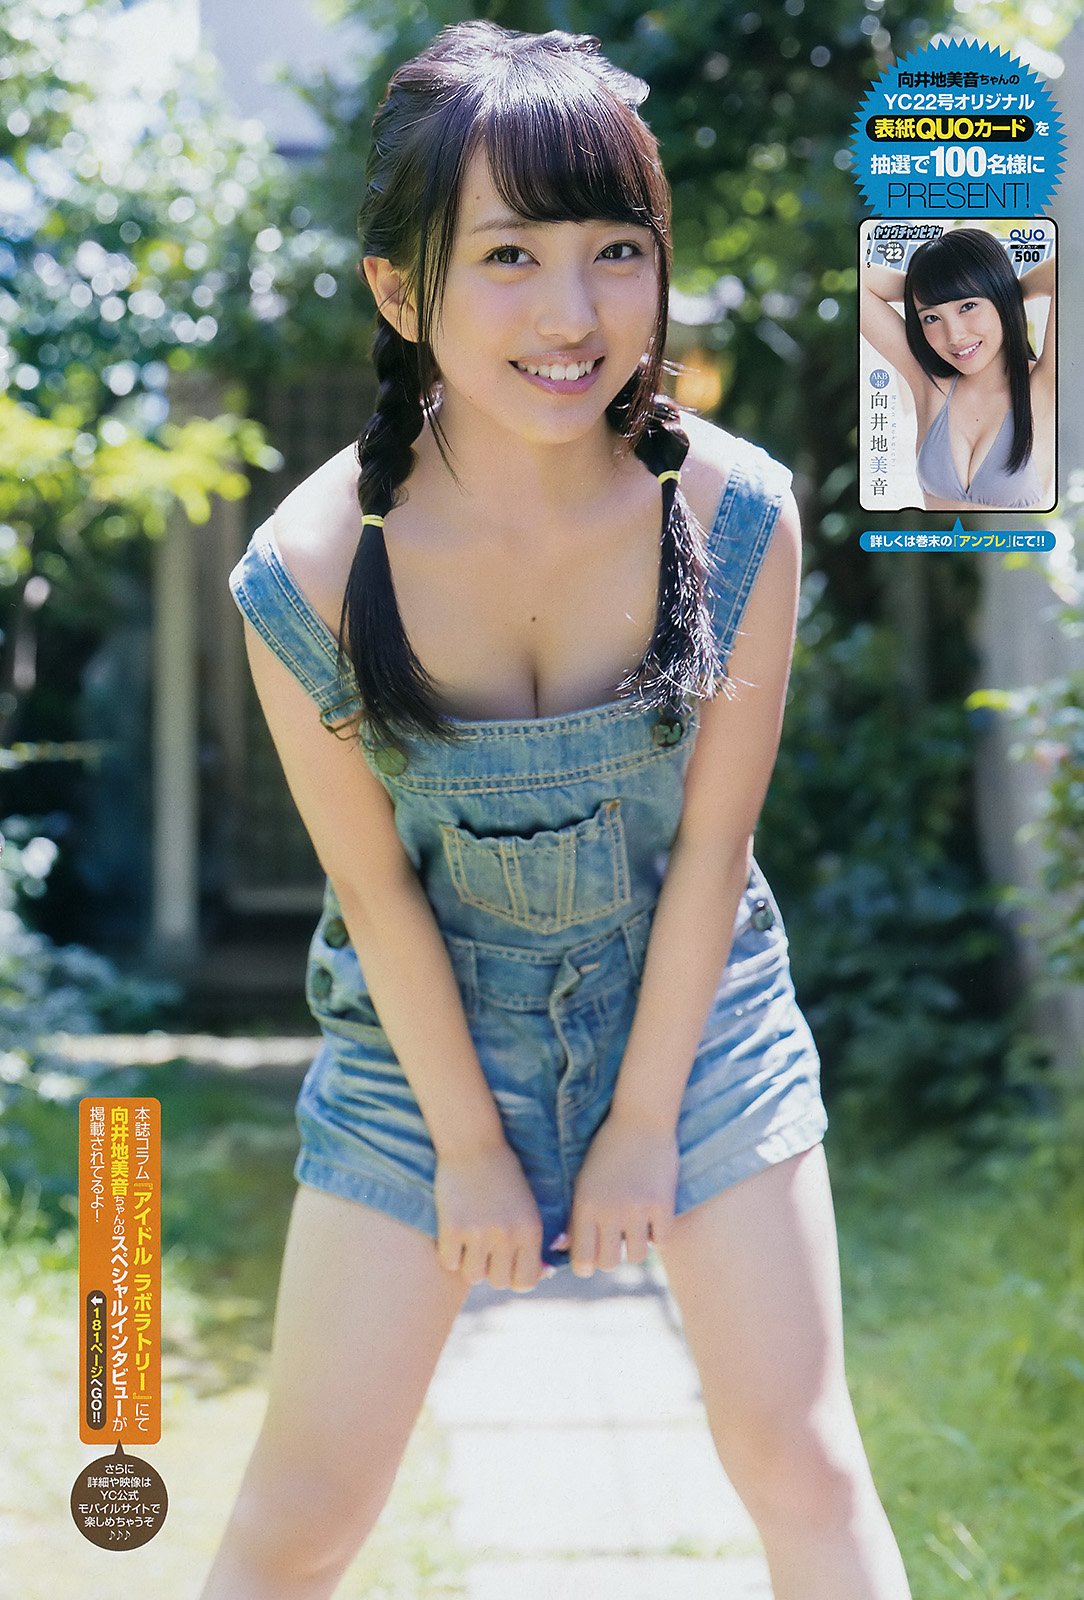 Mukaichi Mion Amazing Girl Picture and Photo